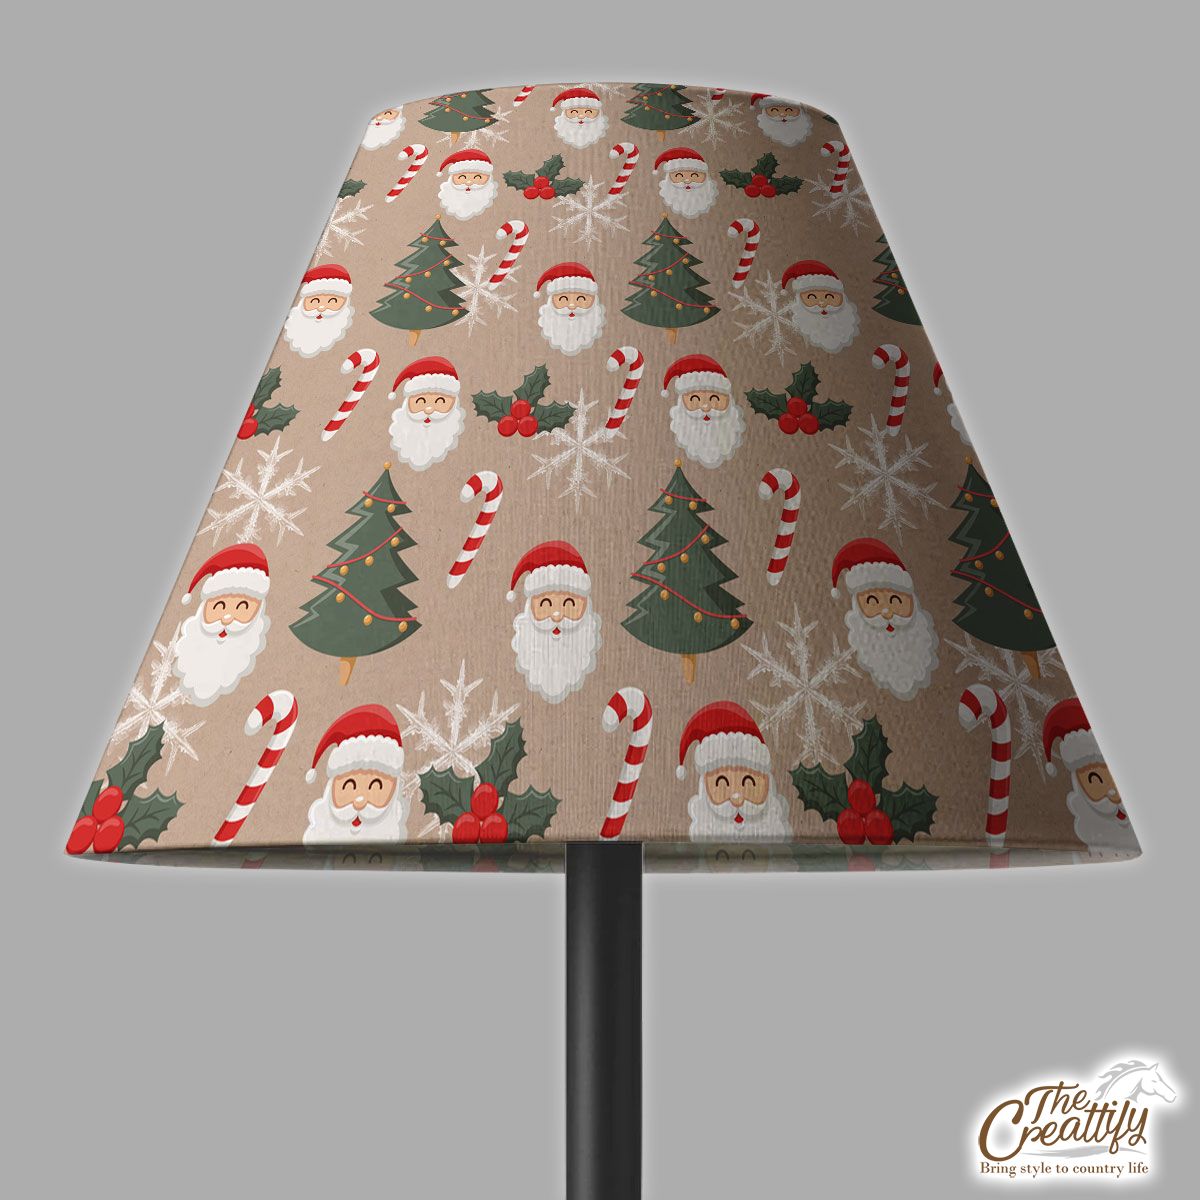 Santa Clause, Christmas Tree, Candy Cane, Holly Leaf On Snowflake Background Lamp Cover